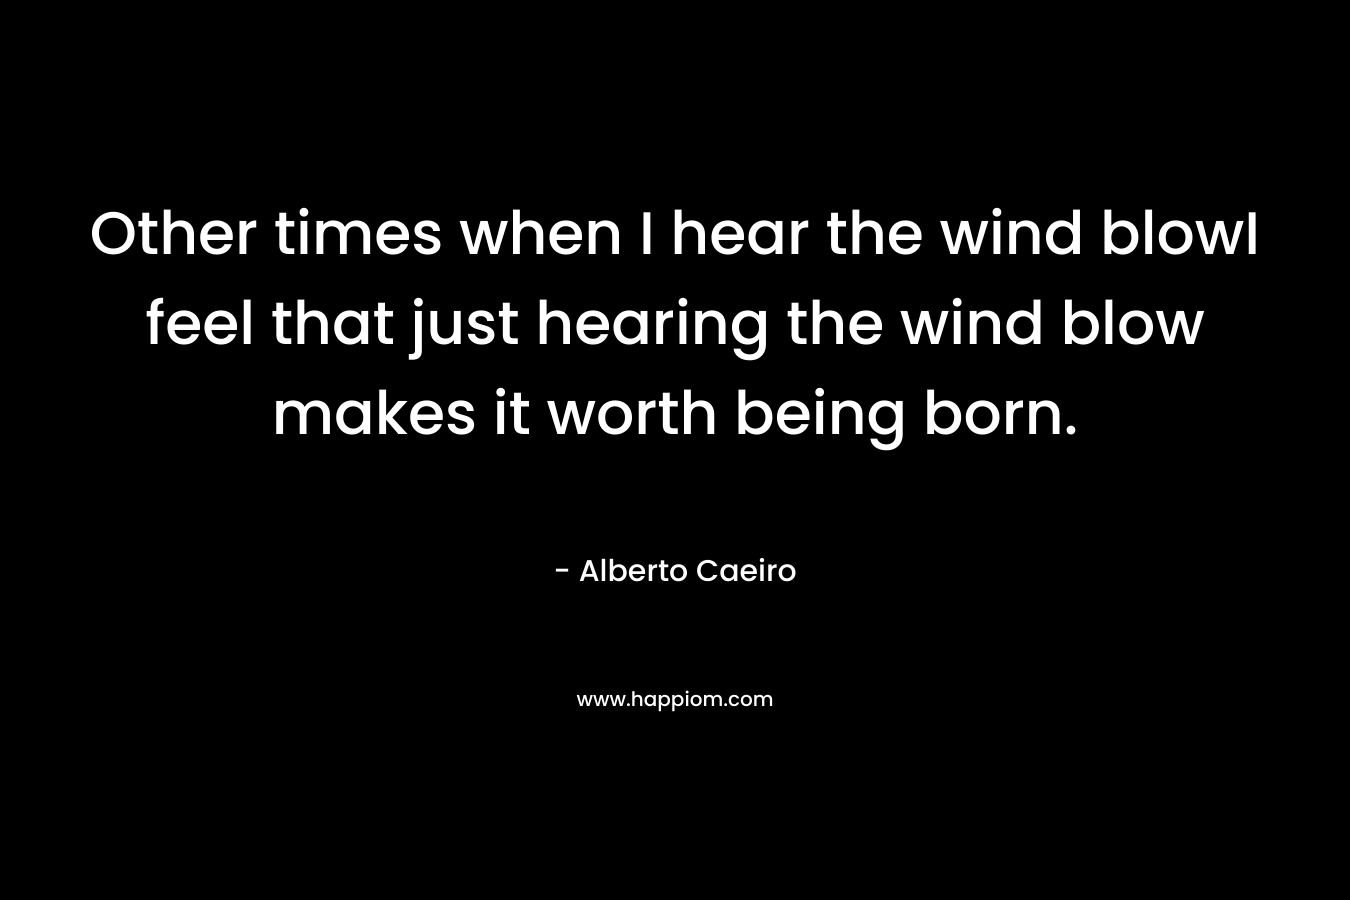 Other times when I hear the wind blowI feel that just hearing the wind blow makes it worth being born. – Alberto Caeiro